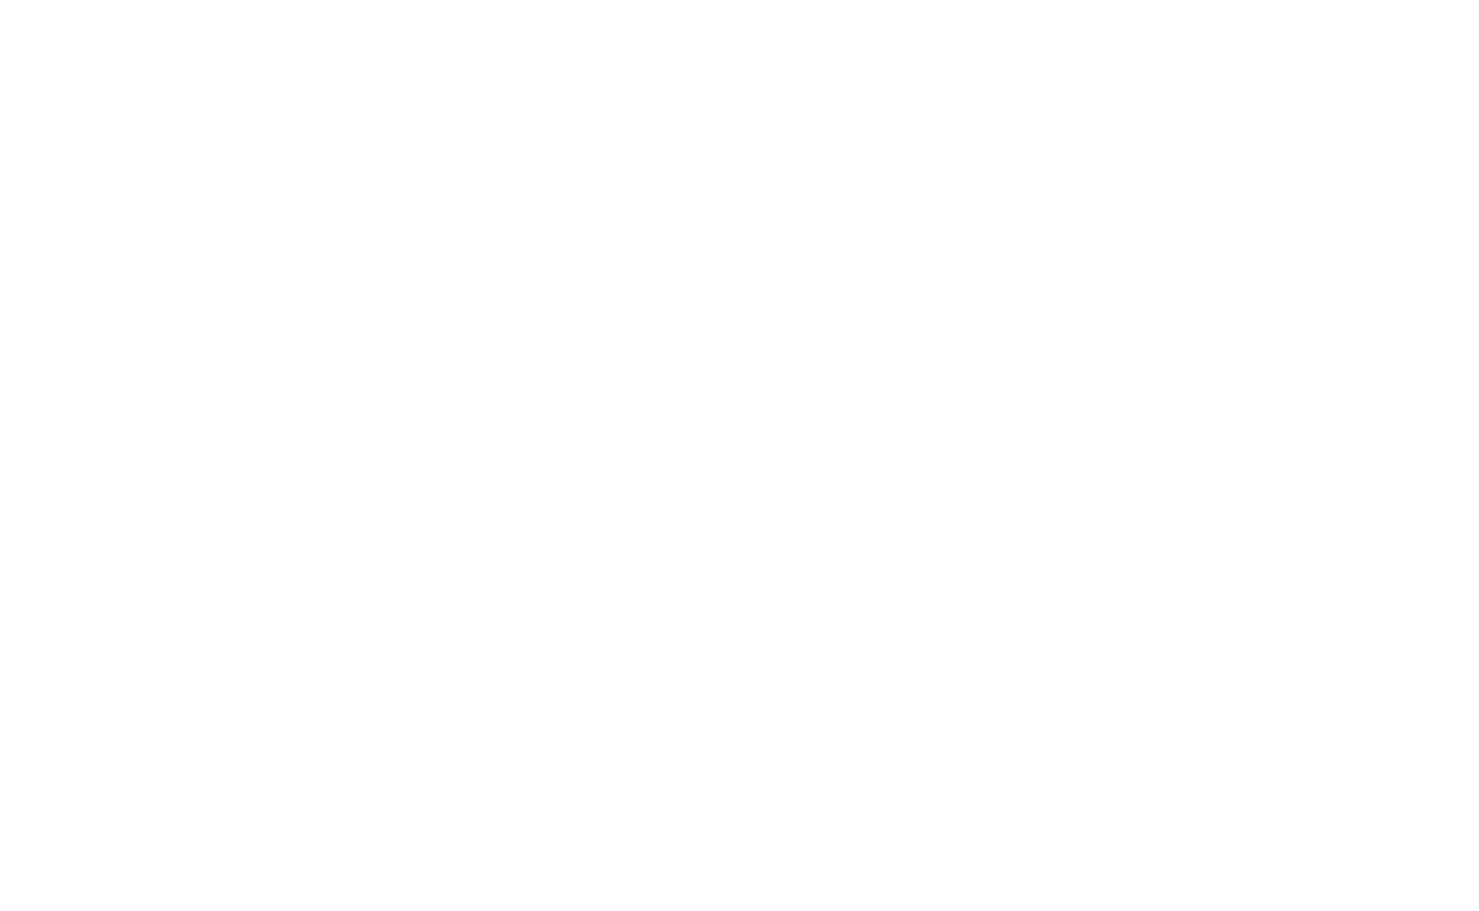 Fit-Ish, Someone who Loves to Lift, food into their mouth Funny Tee